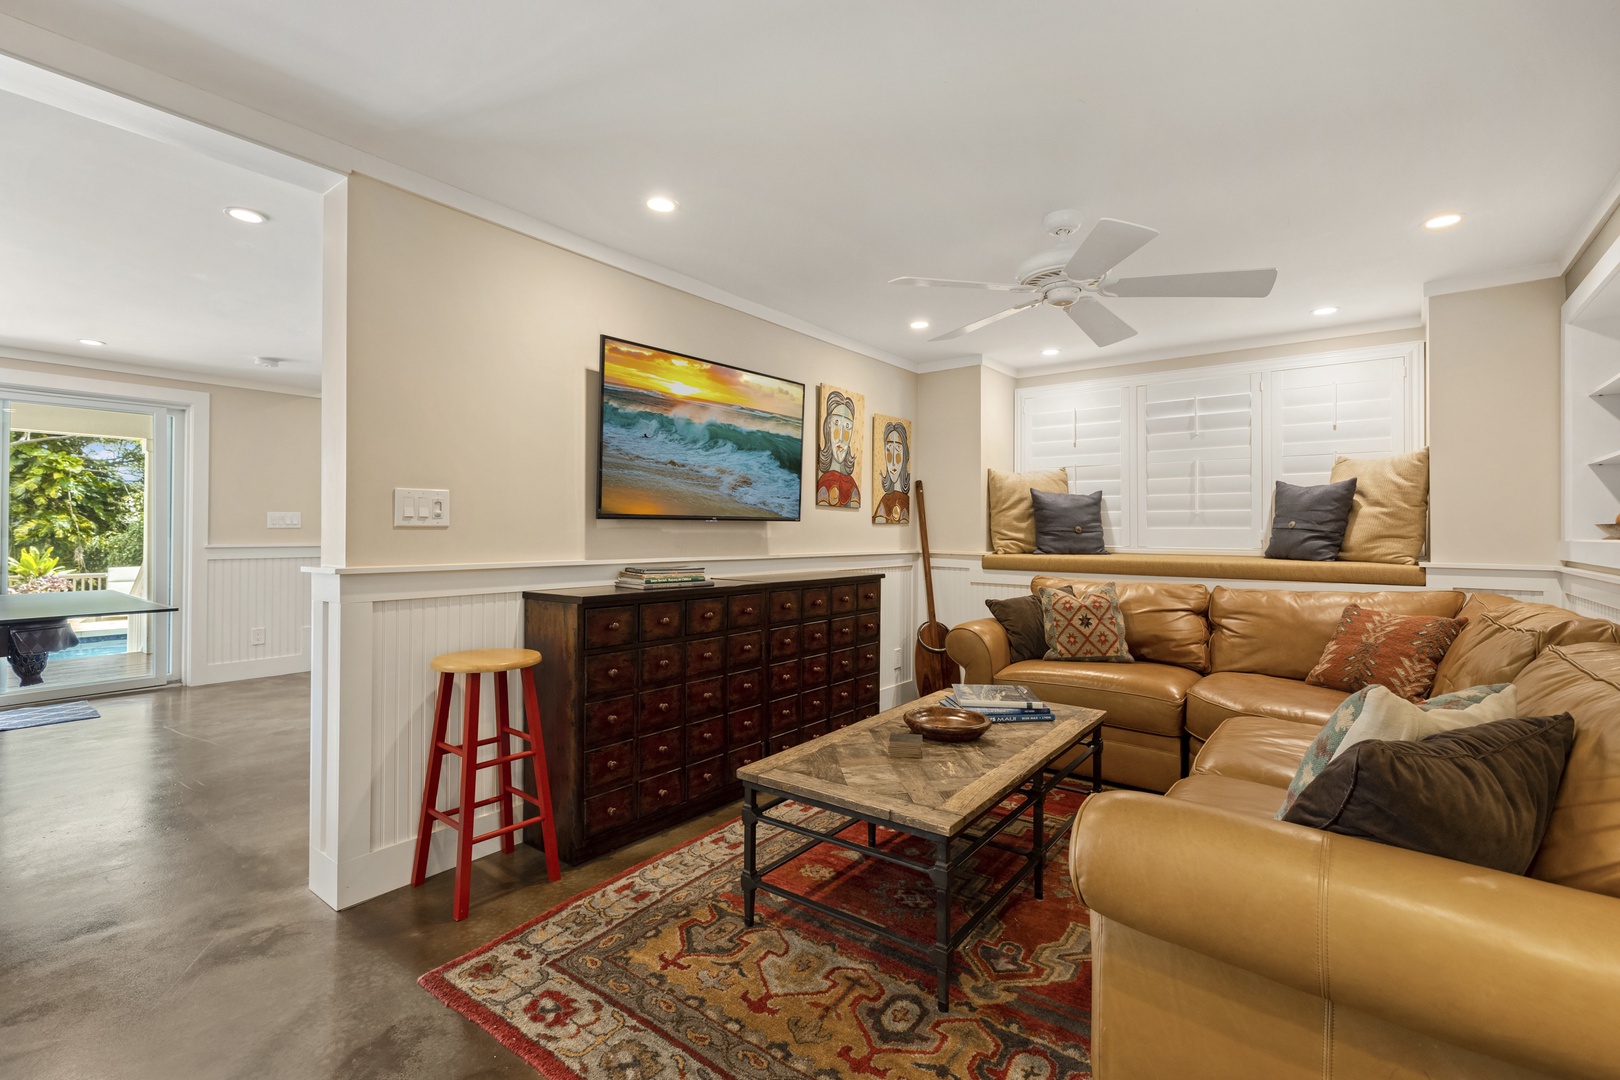 Honolulu Vacation Rentals, Hale Le'ahi* - Relax and unwind in the downstairs lounge area